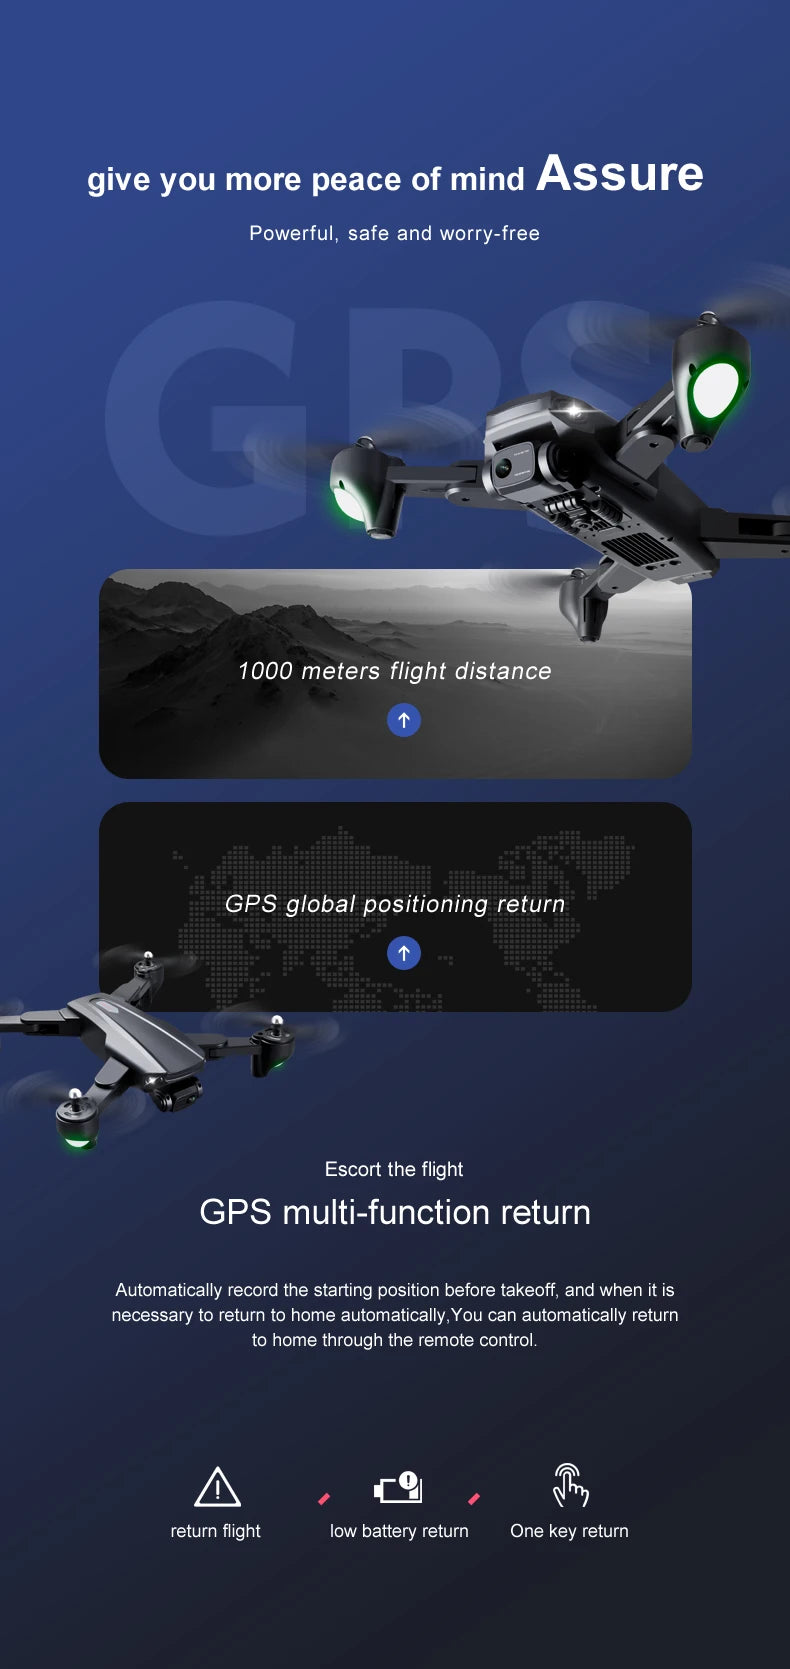 R20 Drone, gps global positioning return automatically record the starting position before take